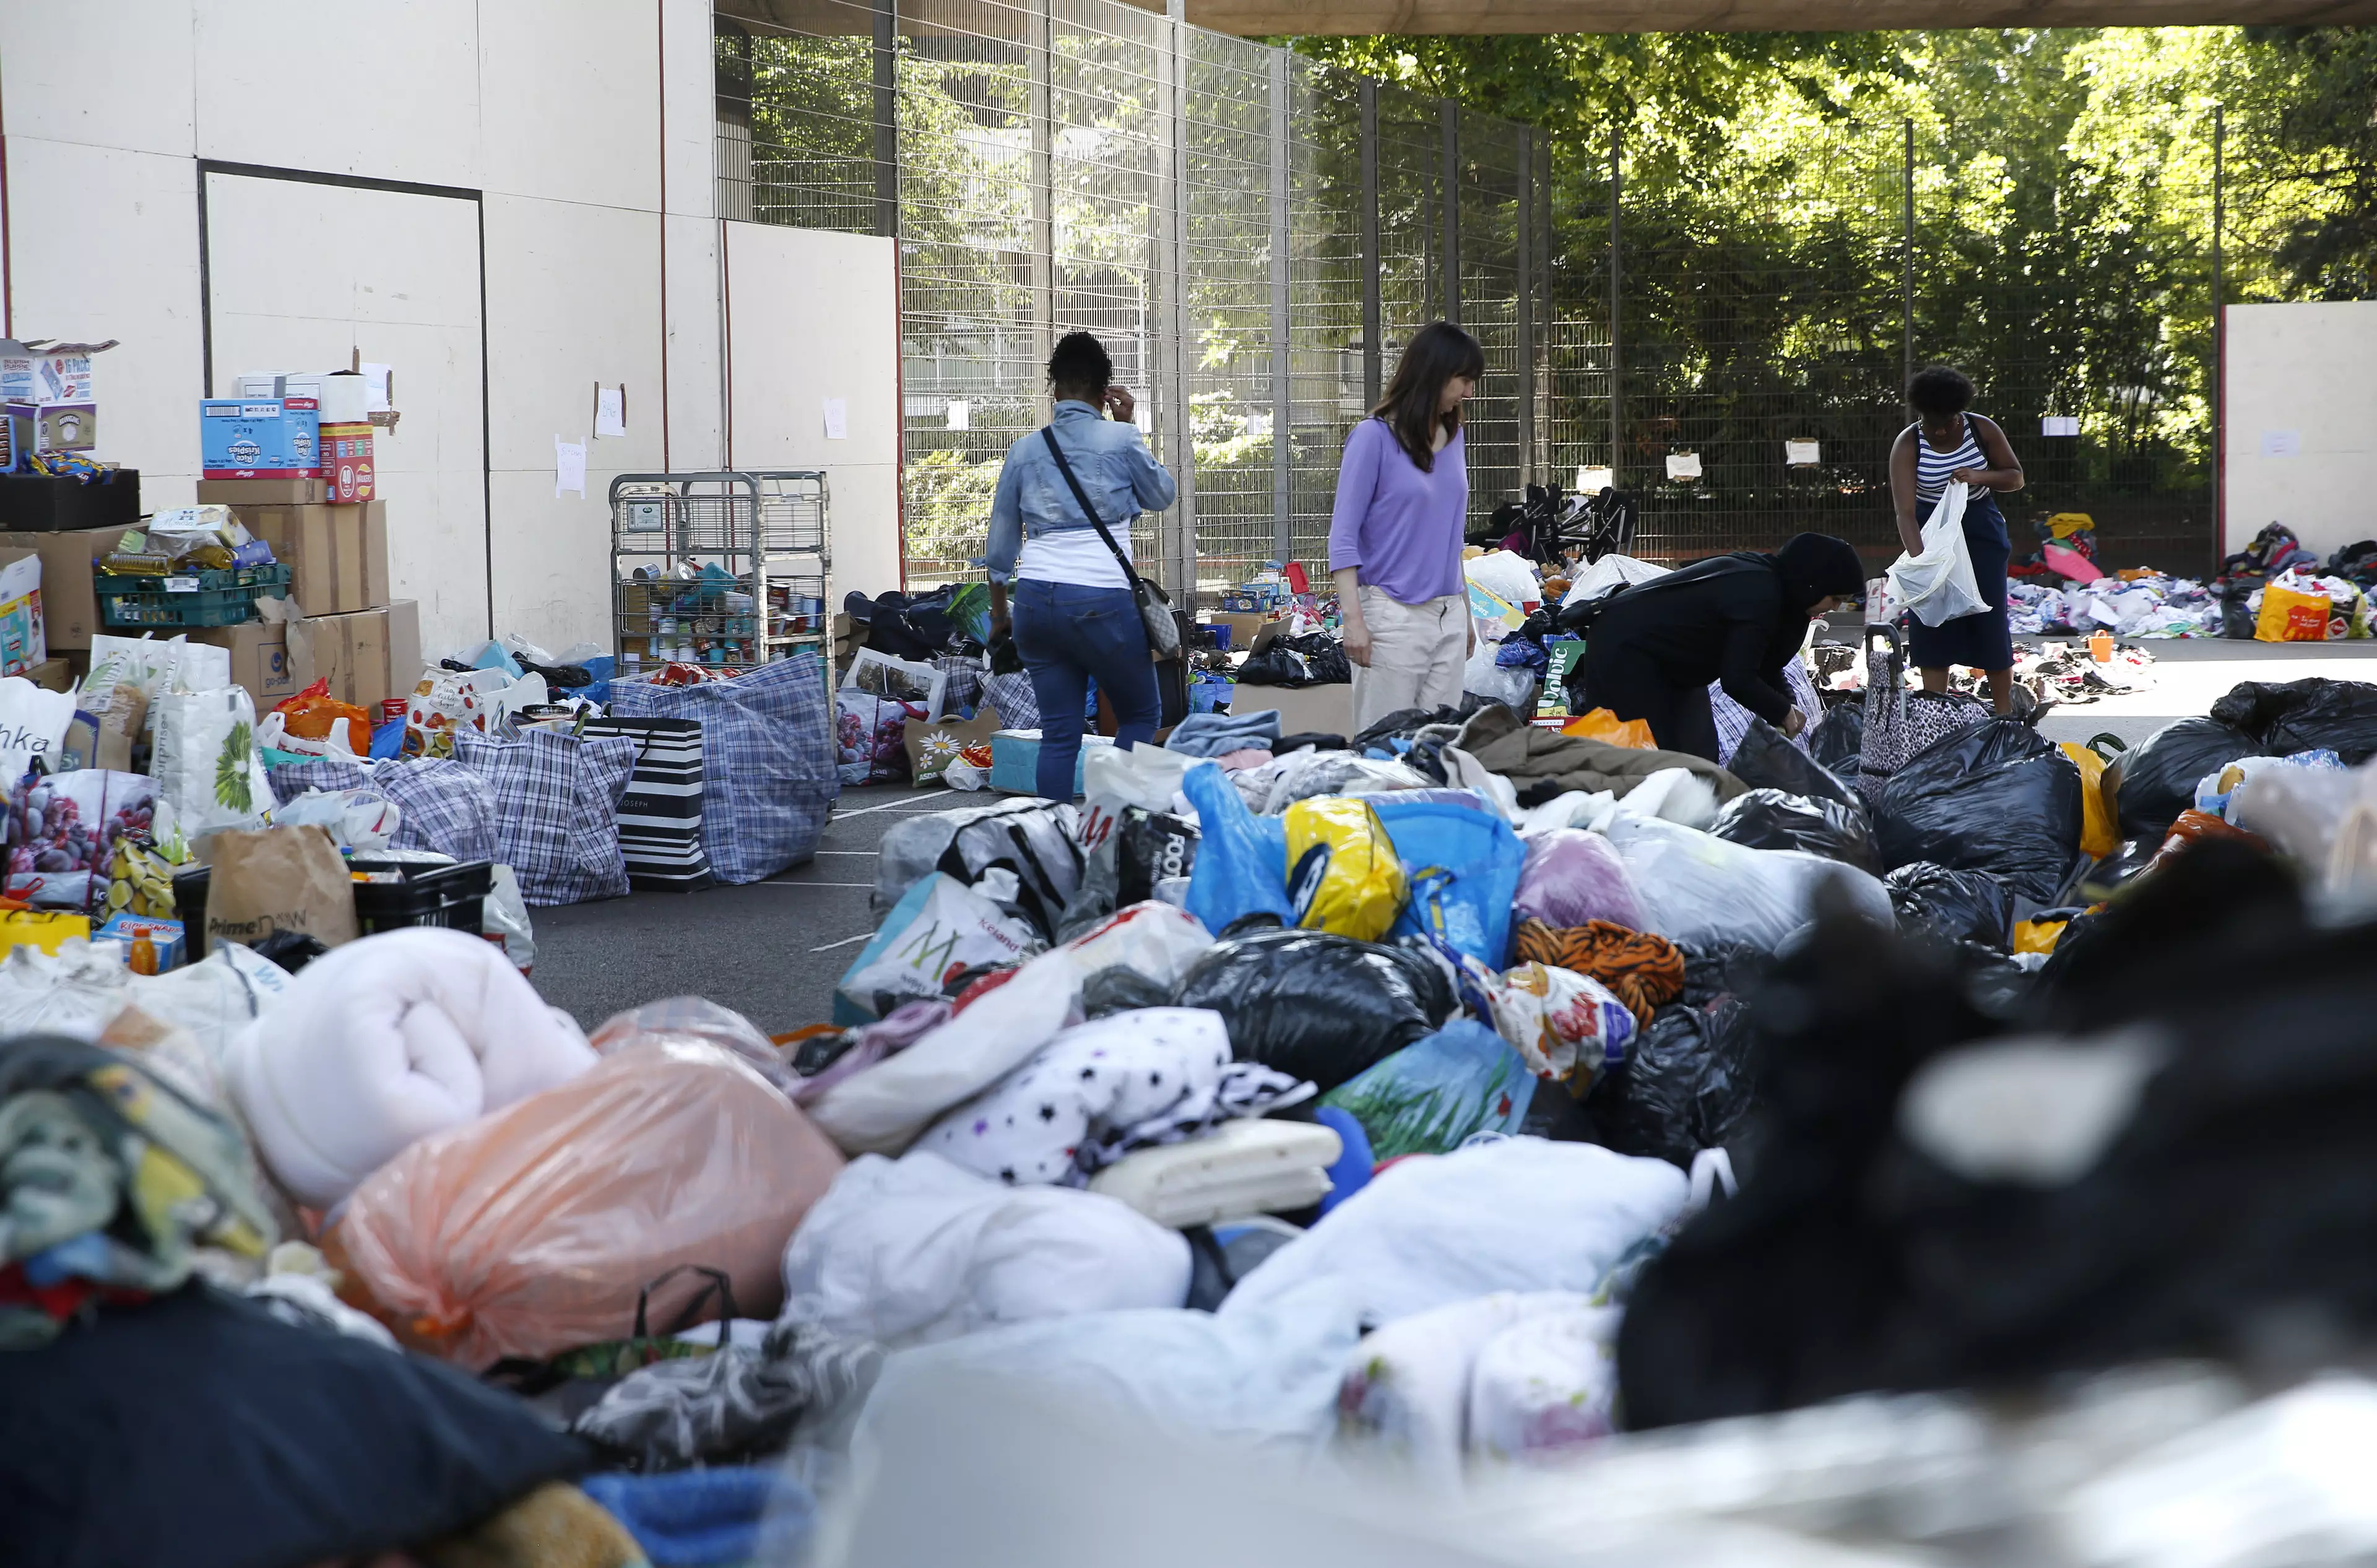 Volunteers help sort donations for those affected by the fire